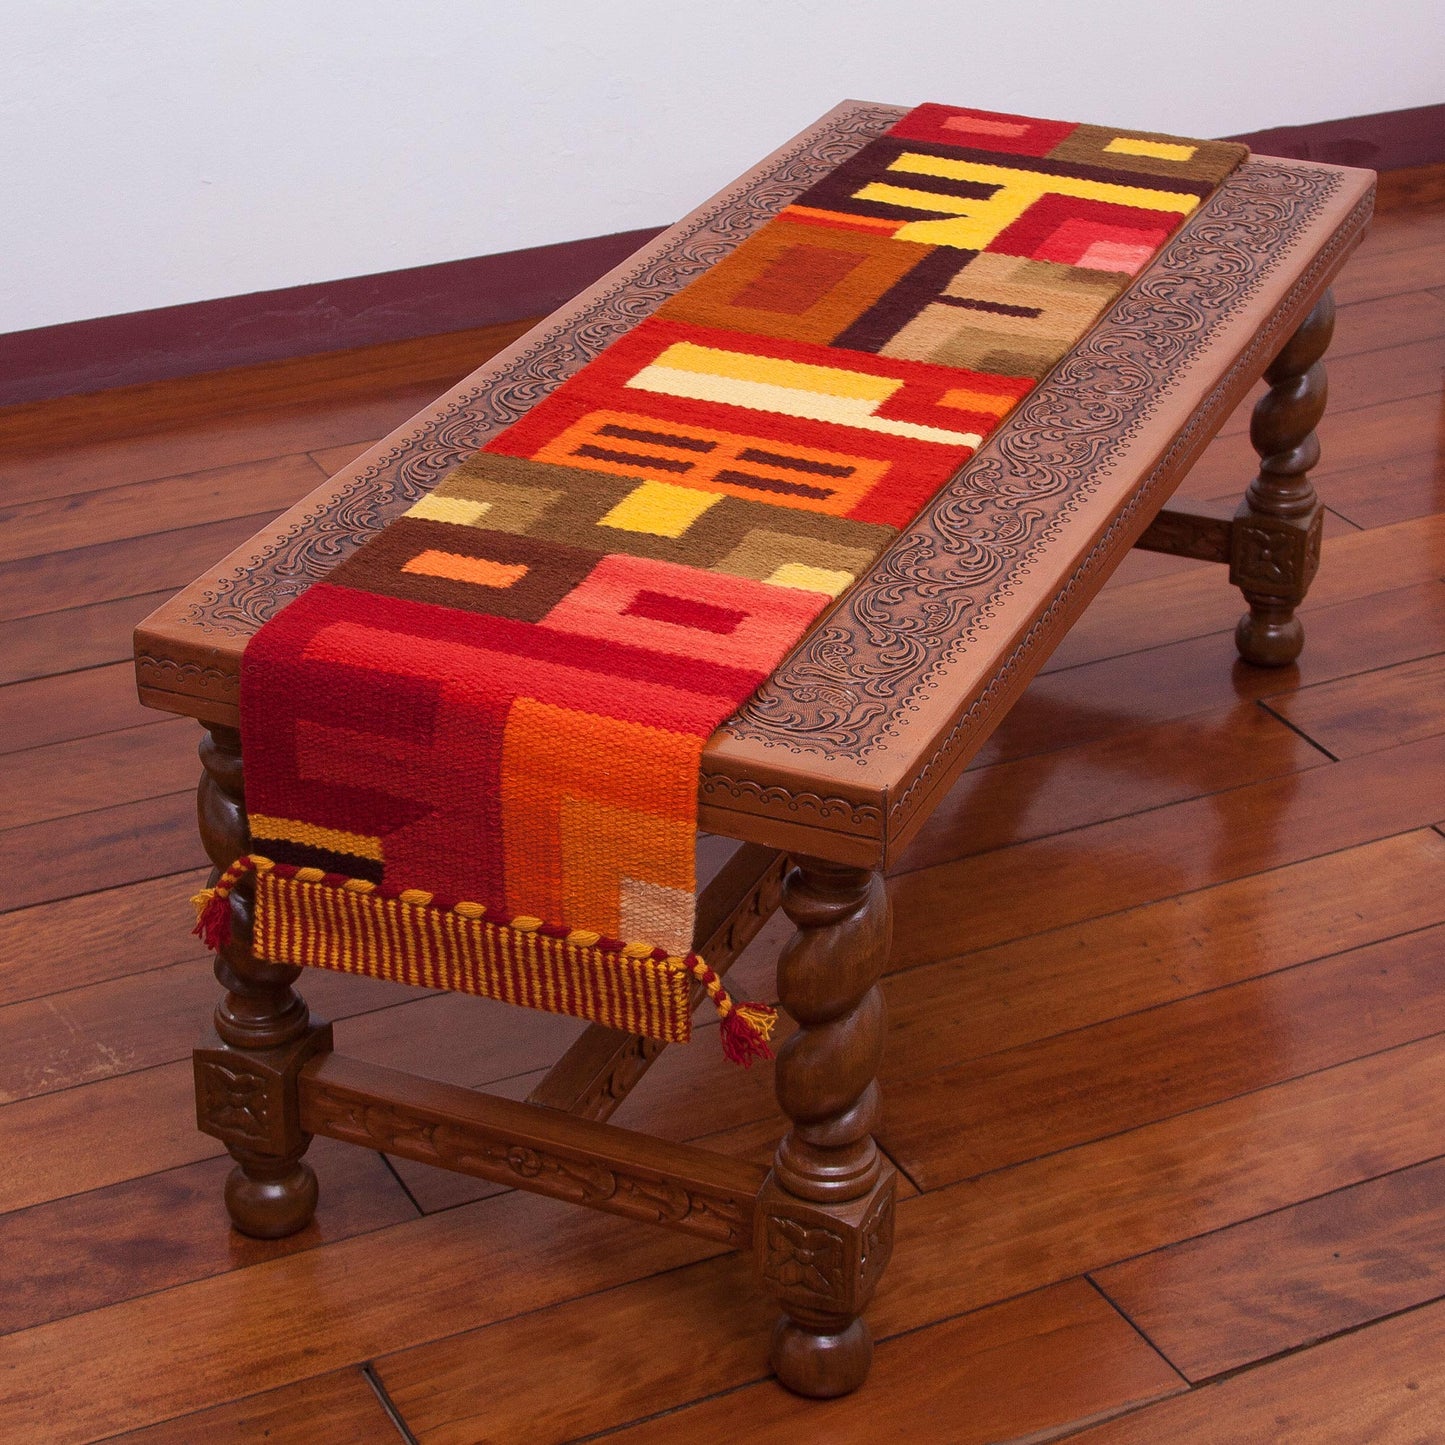 Beauty in Asymmetry Handwoven Colorful Wool Blend Table Runner from Peru